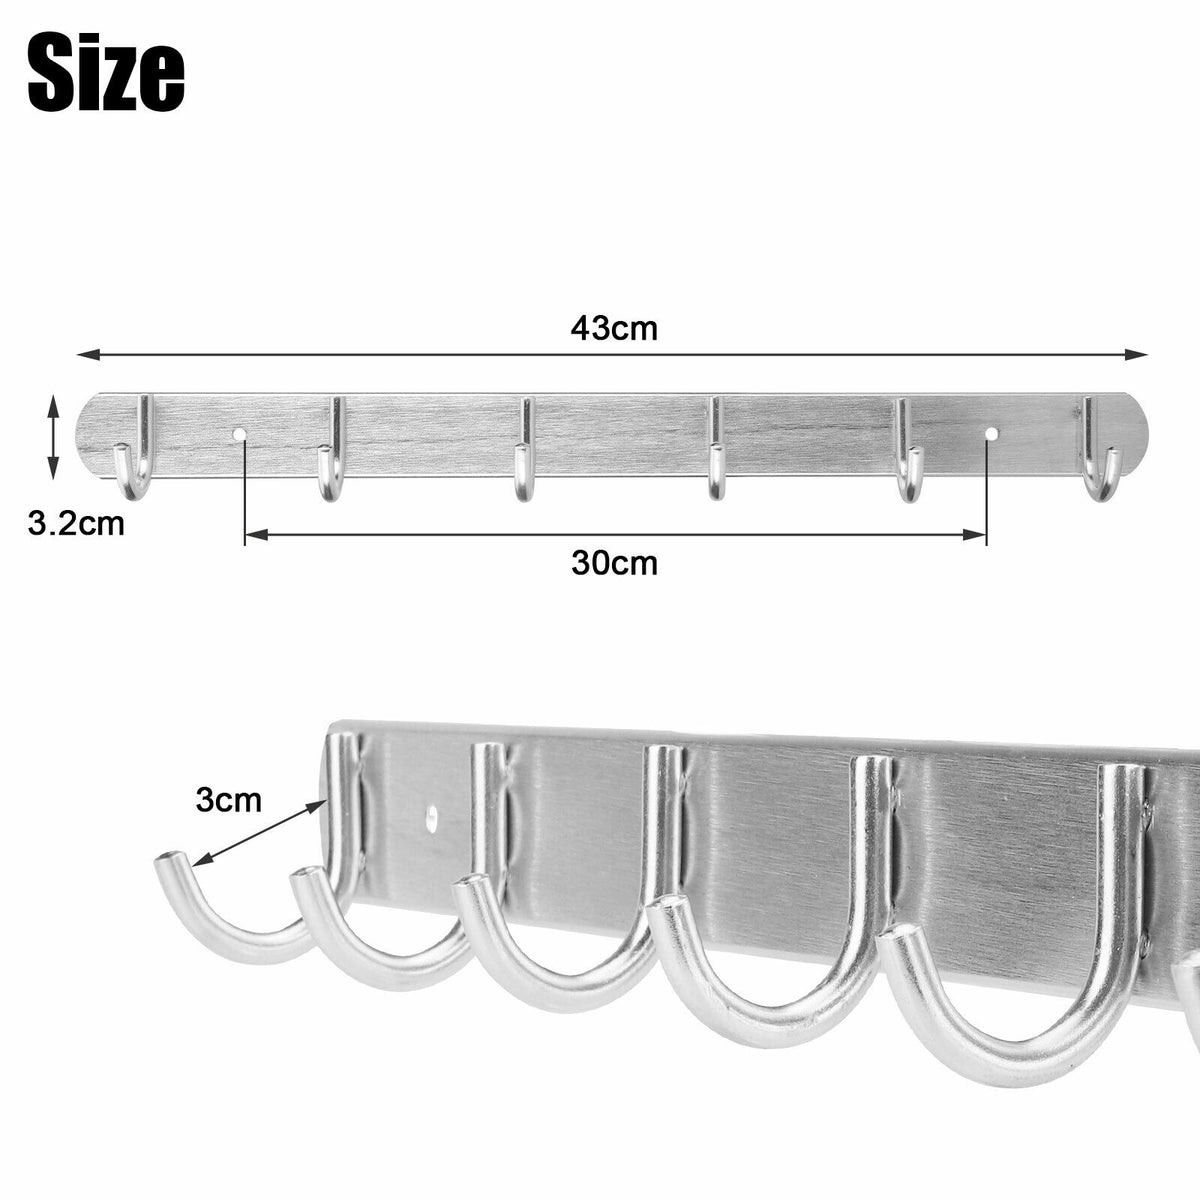 12-Hook Wall Mount Towel Rack Hanger Coat Holder for Clothes and Robes